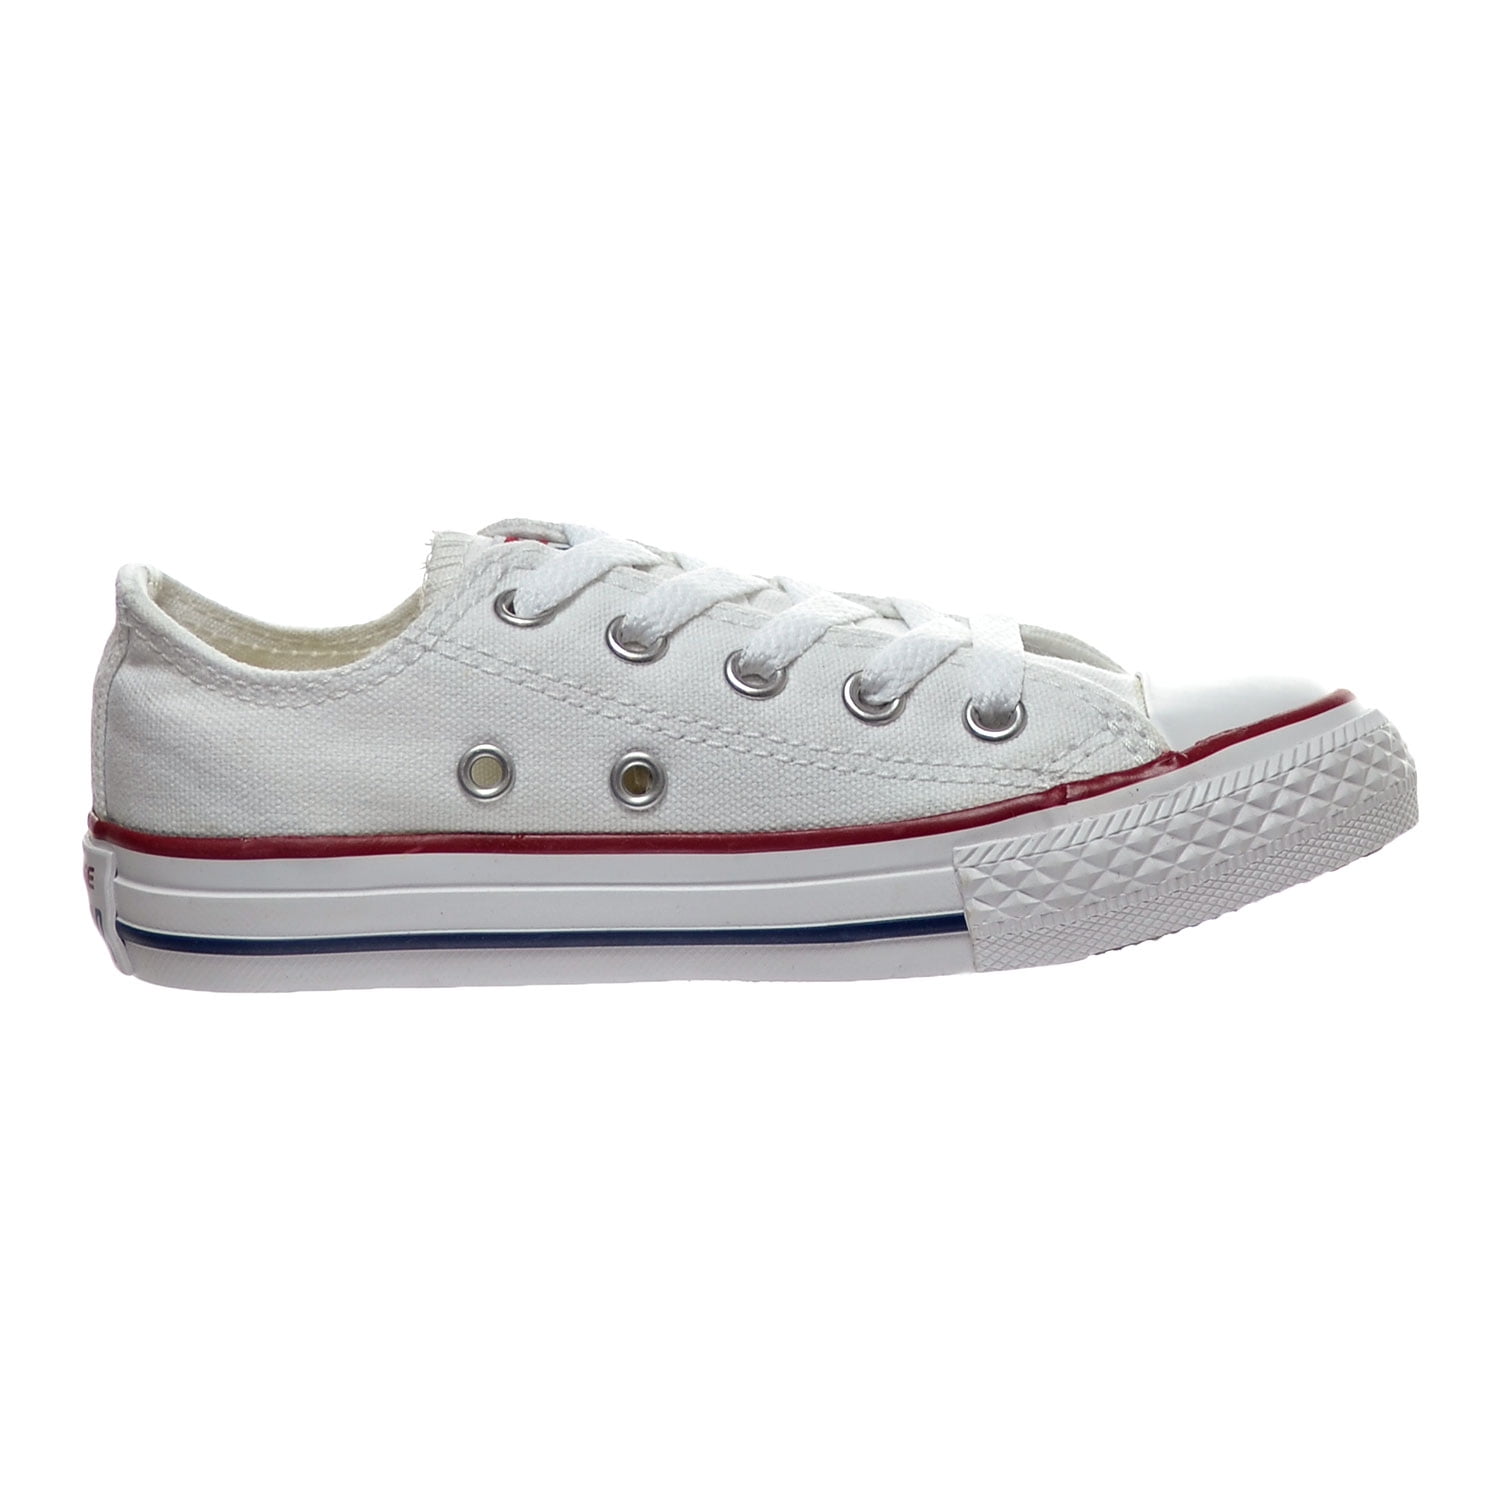 Converse Chuck Taylor All Star Ox Ankle-High Fabric Fashion Sneaker ...